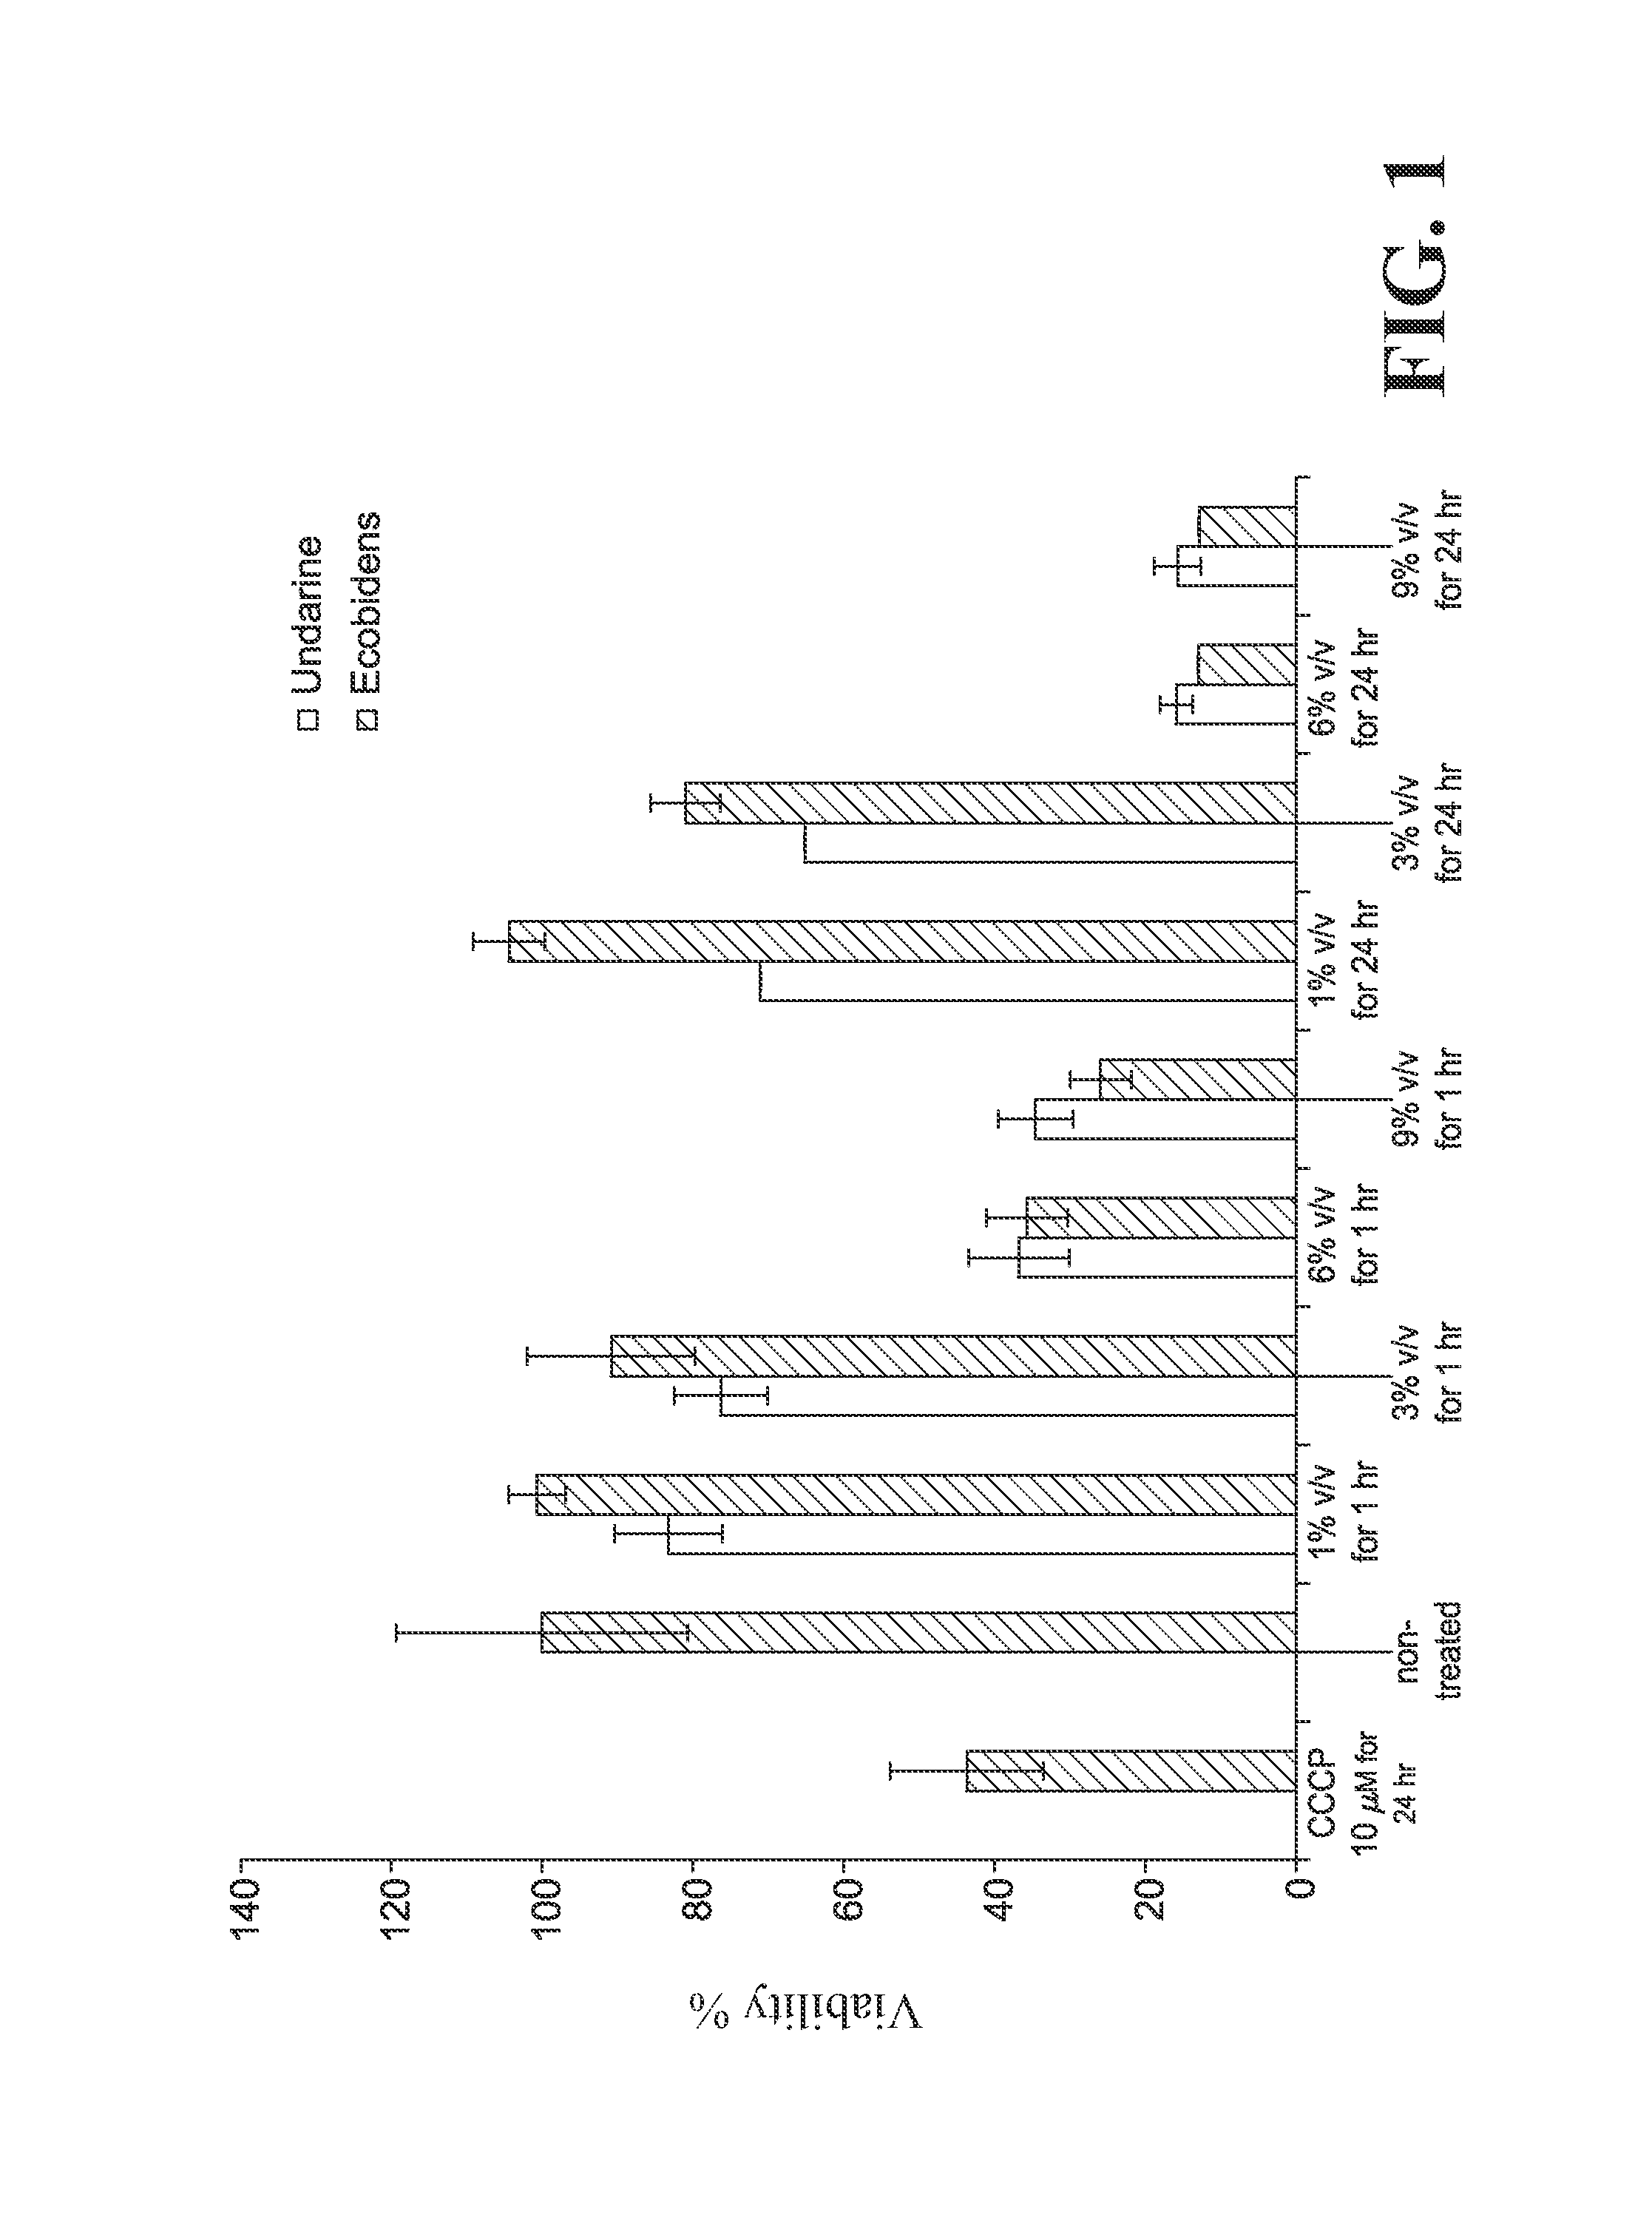 Topical compositions and methods for reducing oxidative stress